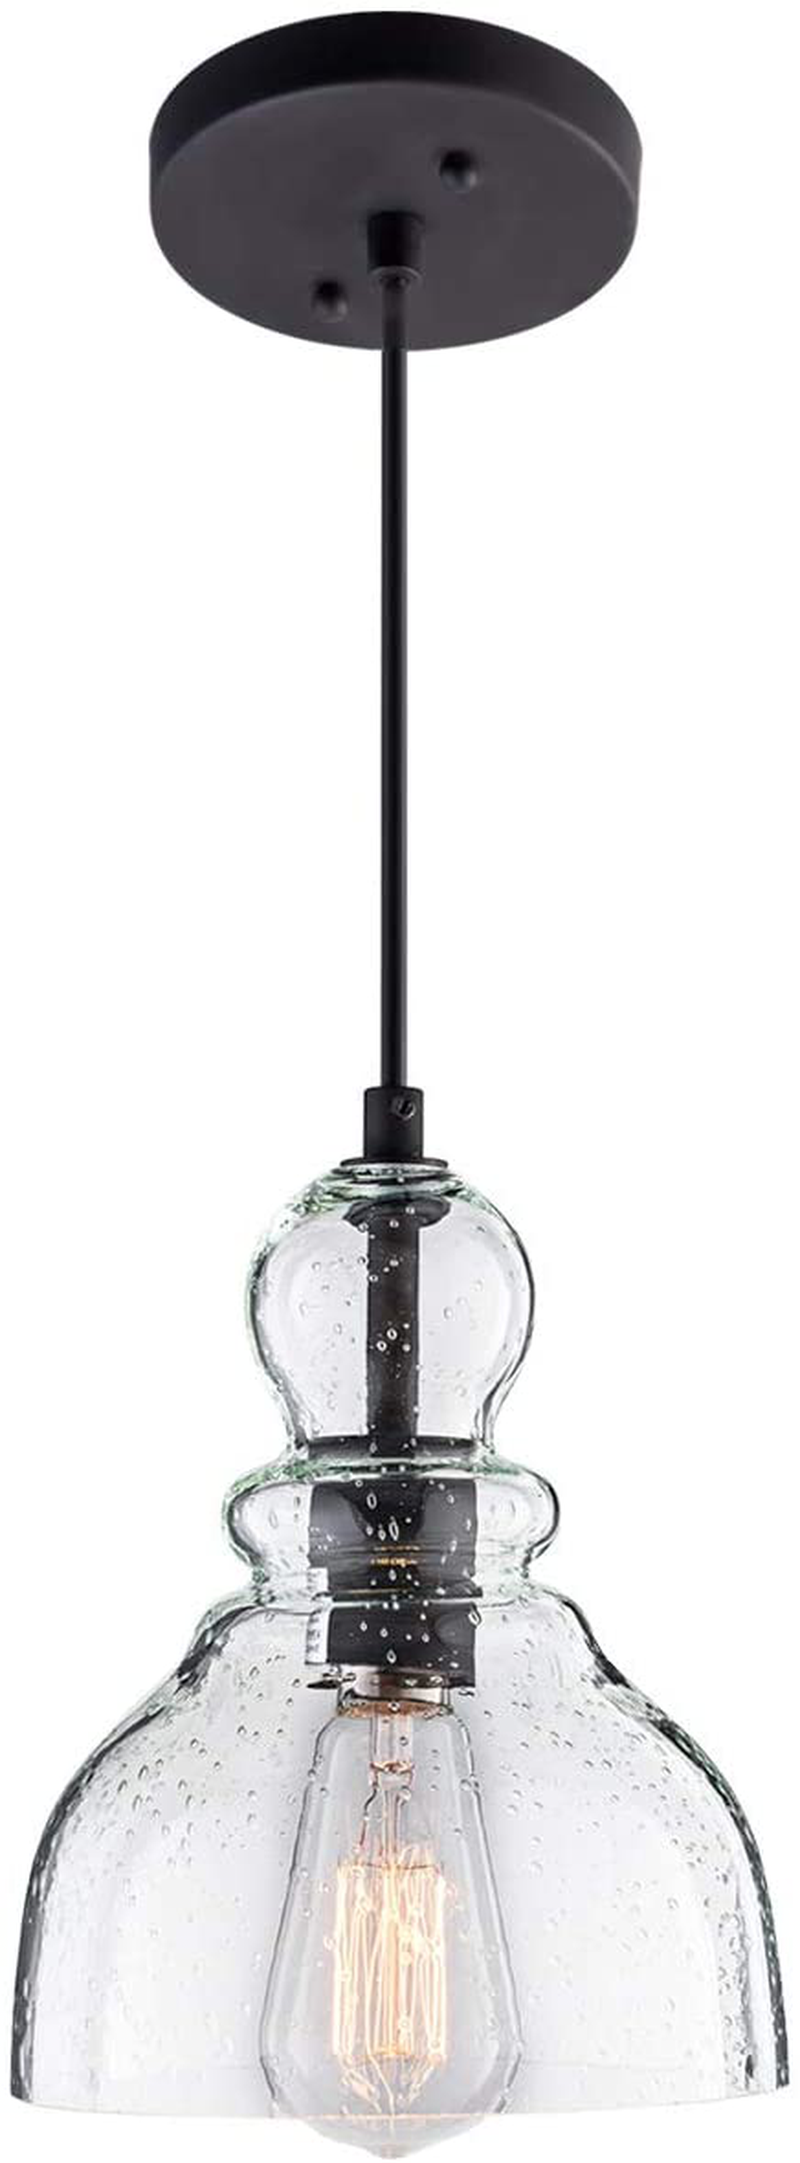 LANROS Industrial Mini Pendant Lighting with Handblown Clear Seeded Glass Shade, Adjustable Cord Farmhouse Lamp Ceiling Pendant Light Fixture for Kitchen Island Restaurant Kitchen Sink, Black, 1 Pack Home & Garden > Lighting > Lighting Fixtures LANROS Black 7 inch 